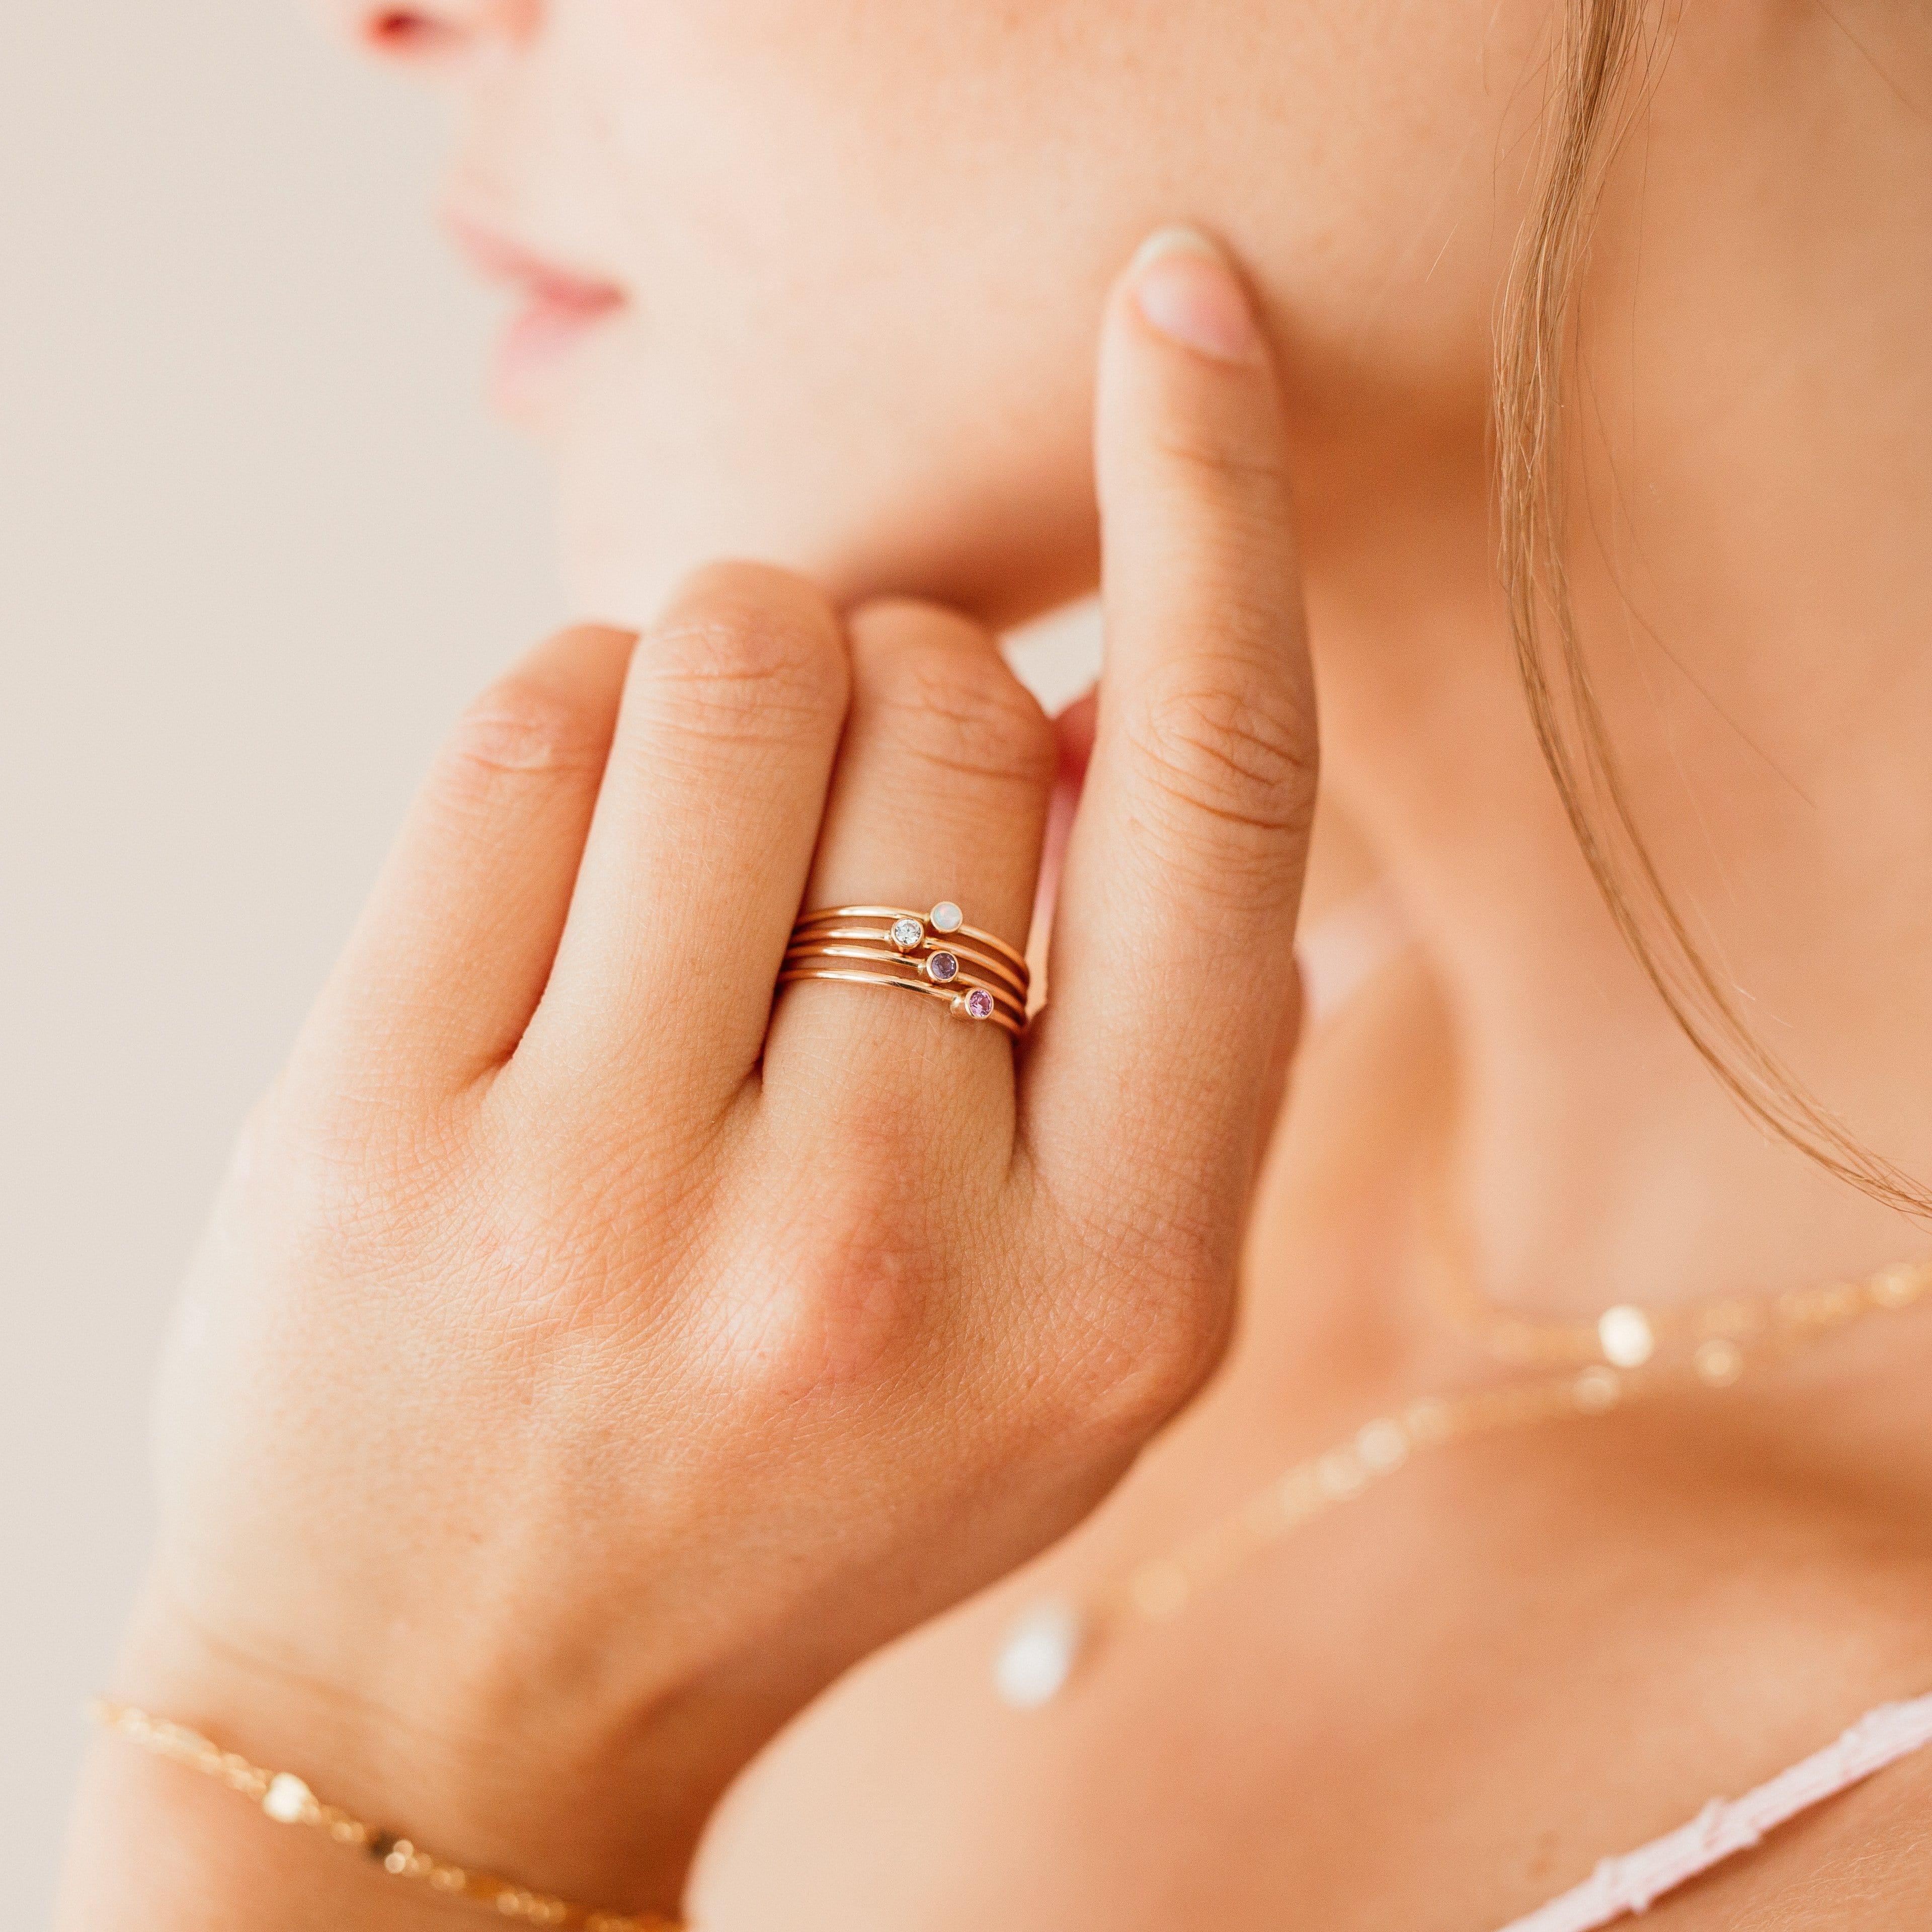 Tiny July Birthstone Ring ∙ Ruby - Nolia Jewelry - Meaningful + Sustainably Handcrafted Jewelry